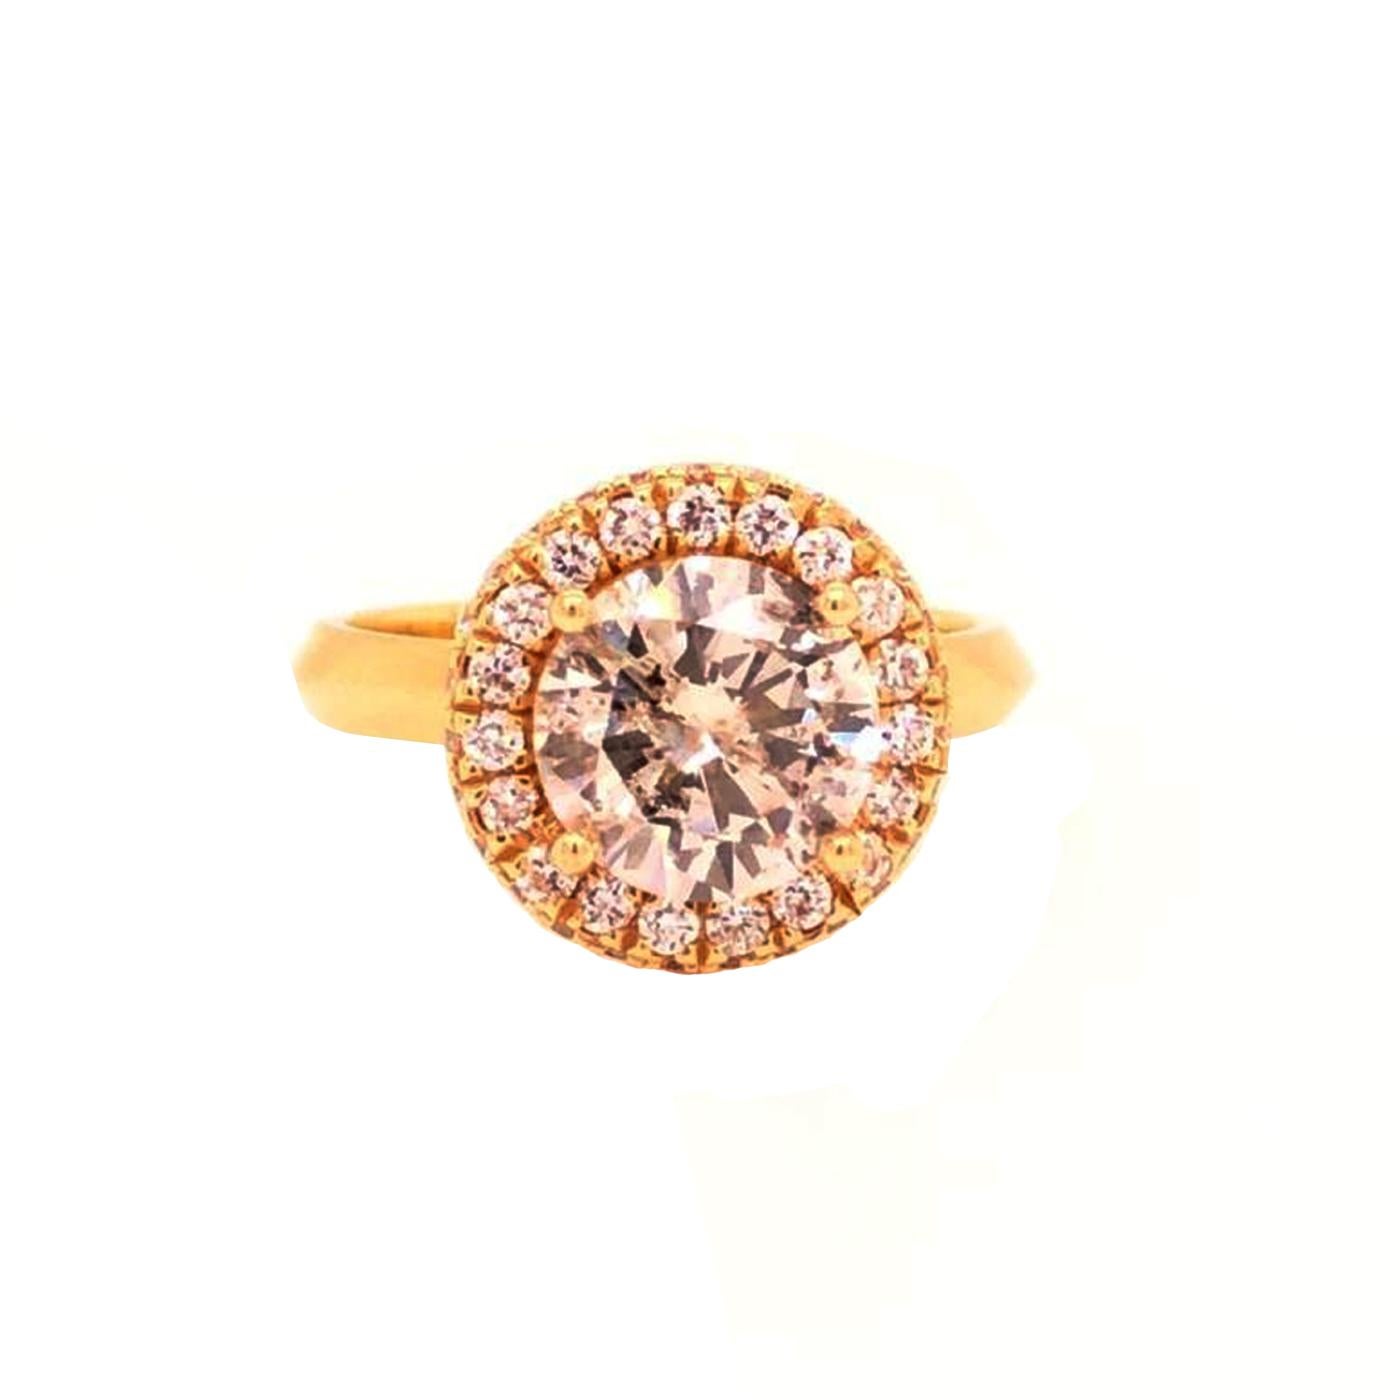 This breathtaking ring features an Halo diamonds natural diamond of I color and Si3 clarity. Set in a sleek, 14K Gold Metal, with a size of 6.5 Sizable, this fantastic piece is guaranteed to delight for decades to come!

Details:
Center Carat